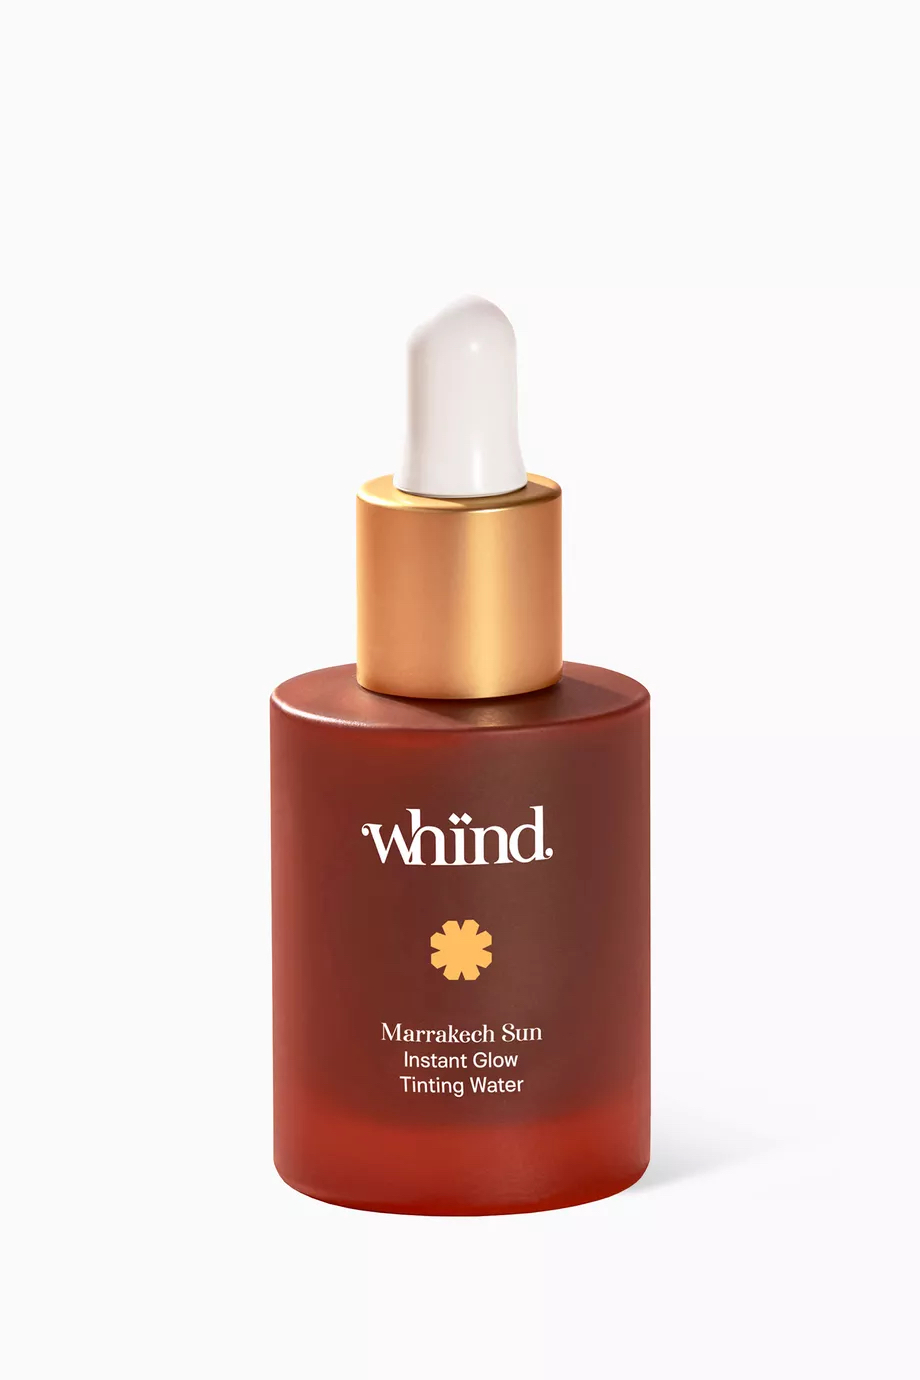 Whind Marrakech Sun Instant Glow Tinting Water